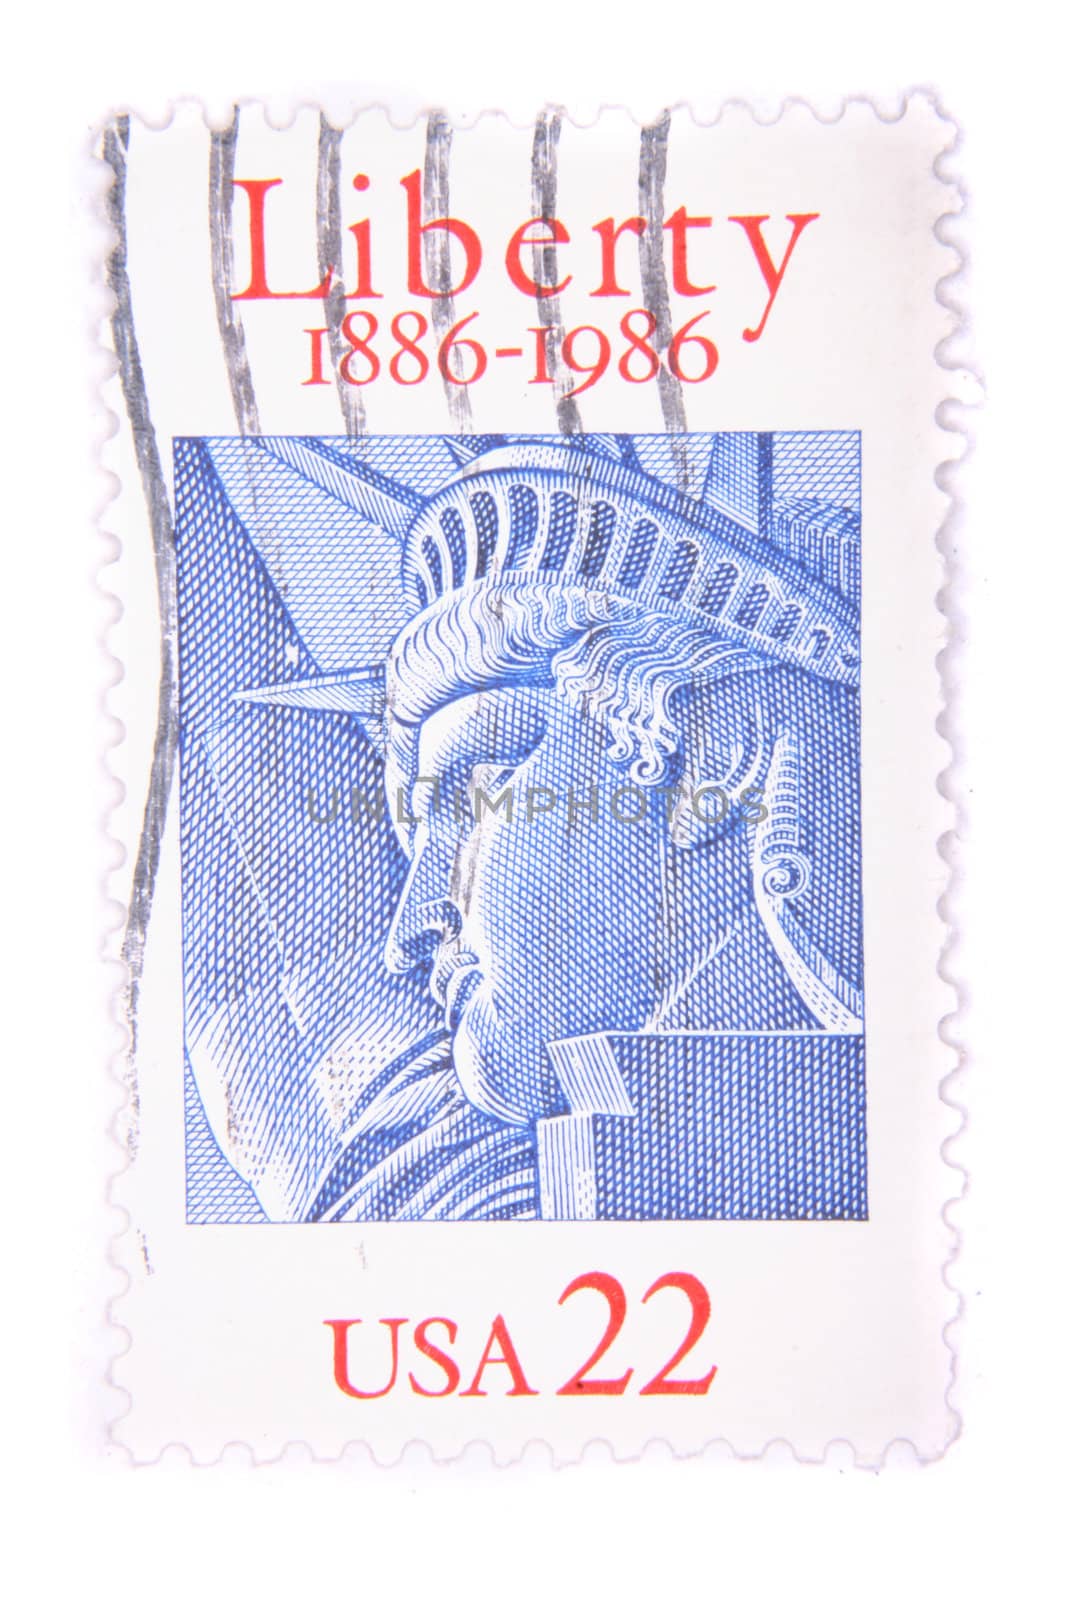 USA postage stamp isolated on the white background